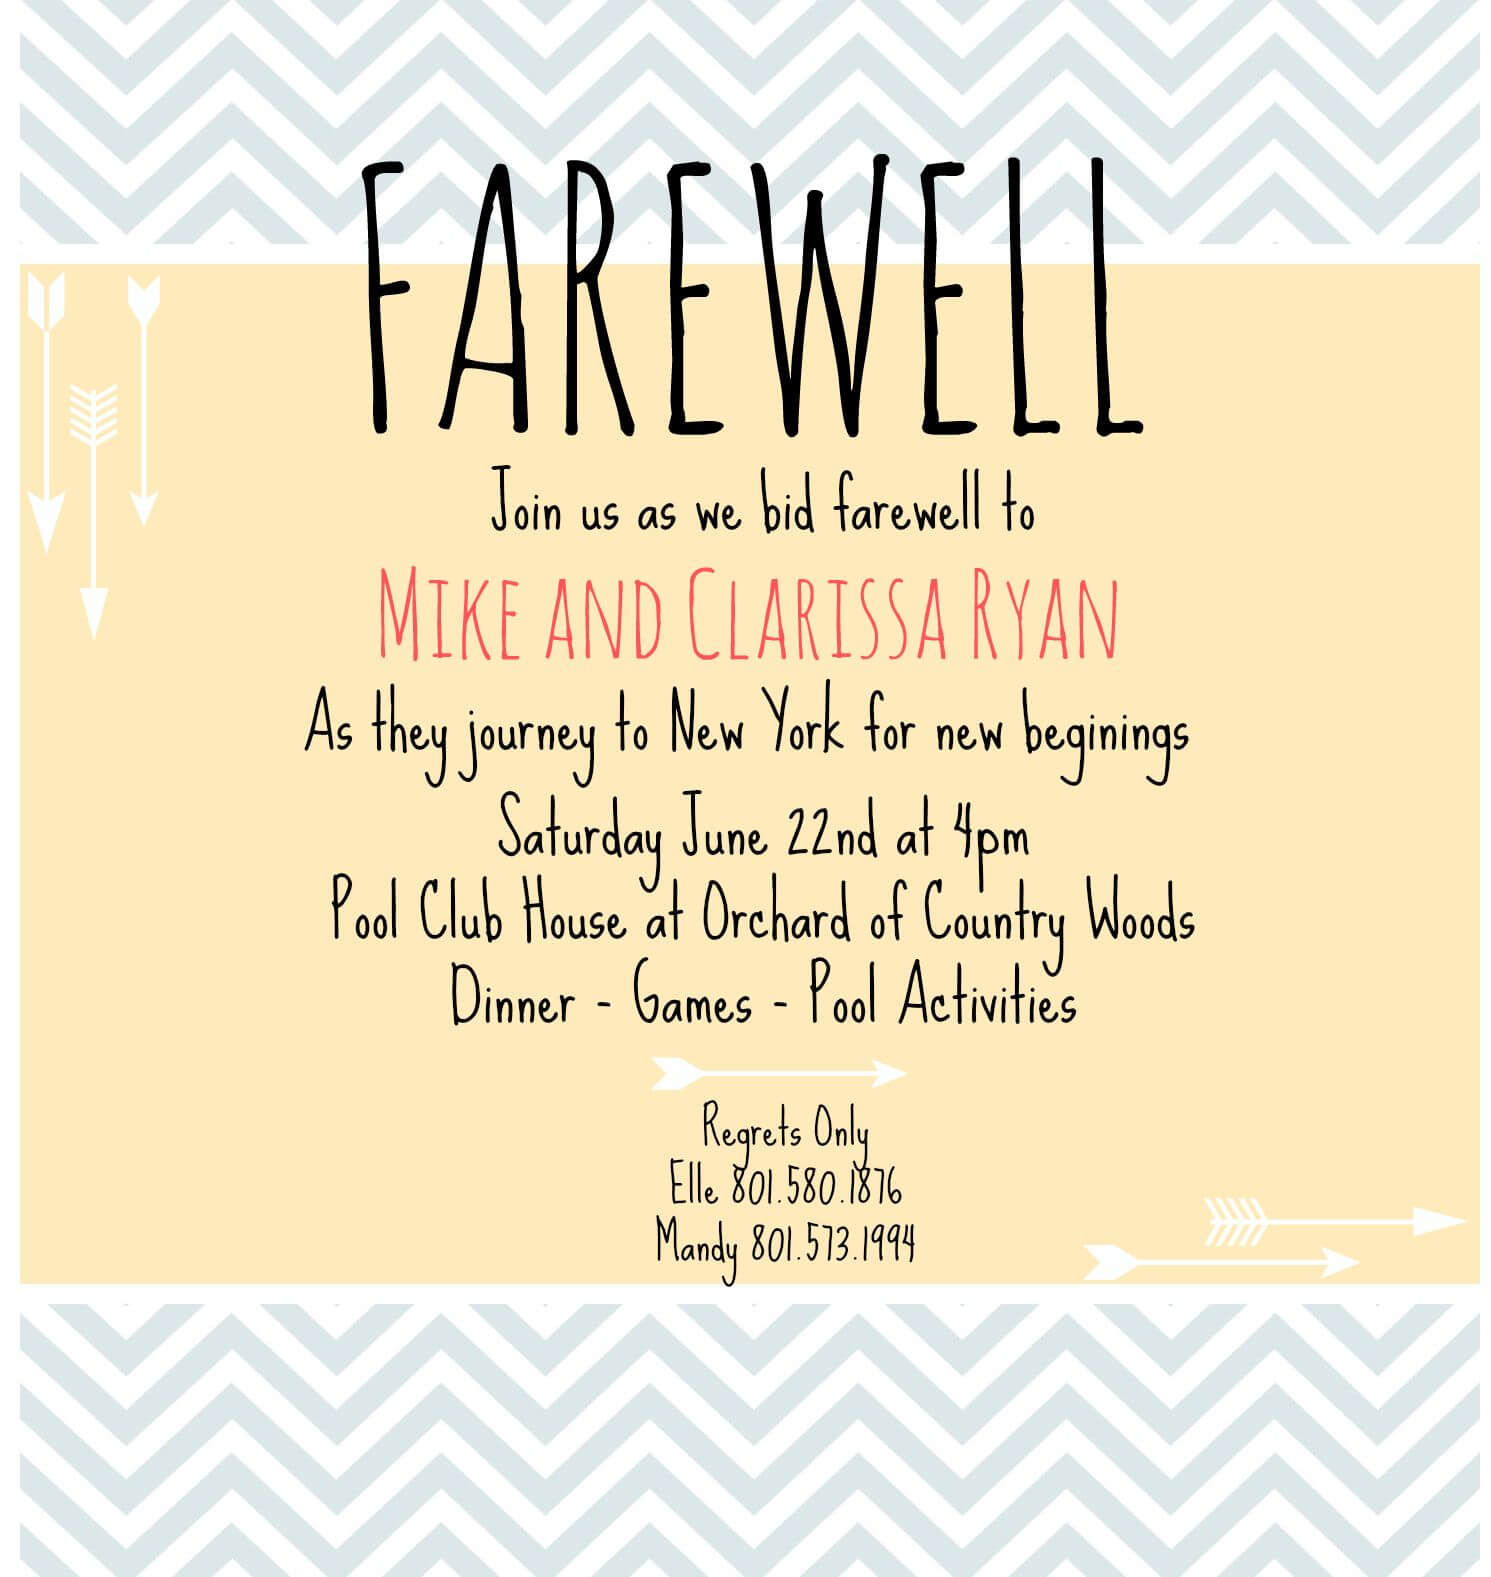 Farewell Invite | Going Away Party Invitations, Farewell Within Farewell Invitation Card Template